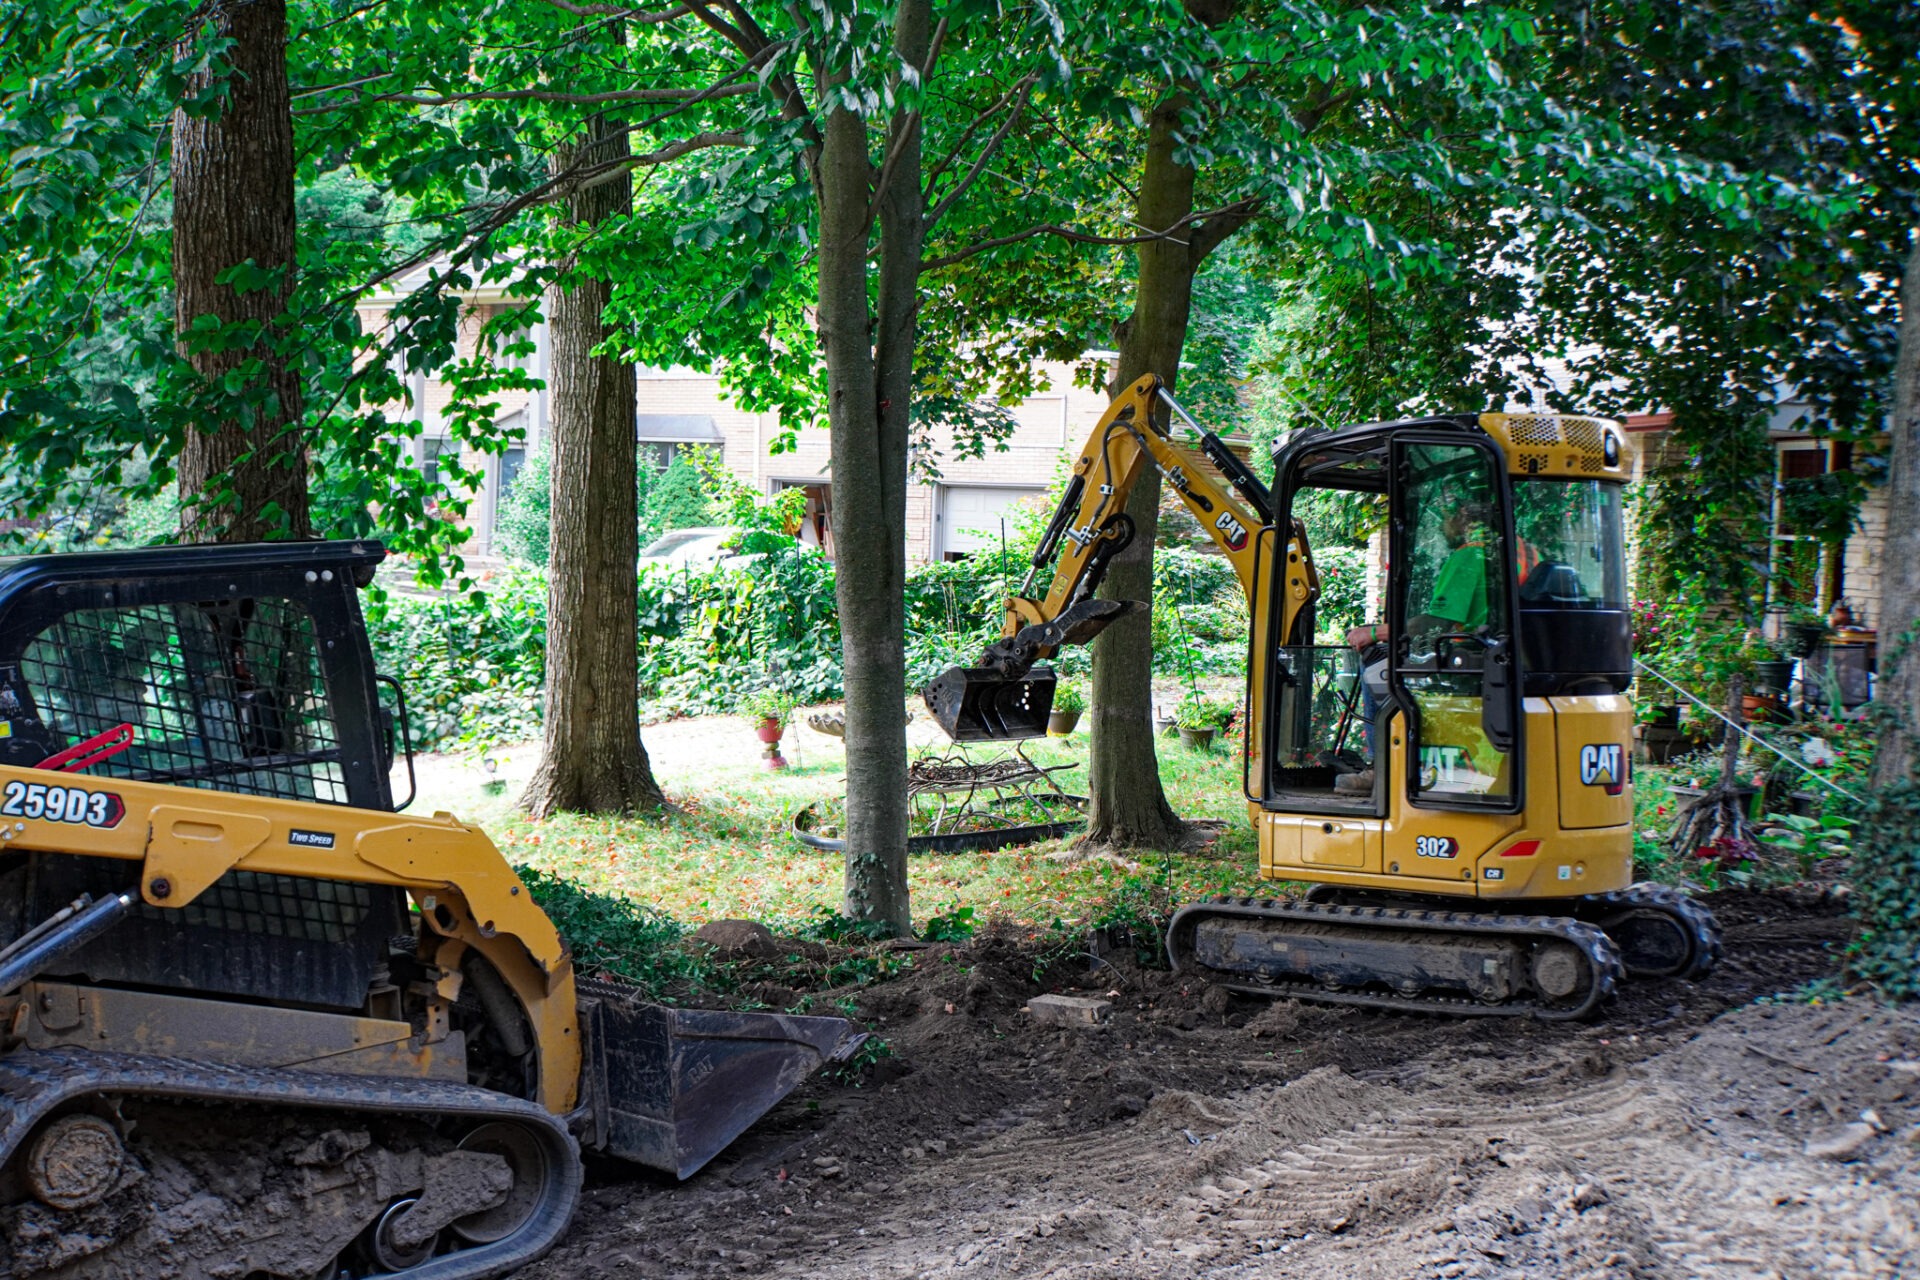 A yellow mini excavator and a skid steer loader are working in a wooded area with freshly moved earth and green trees surrounding the construction site.